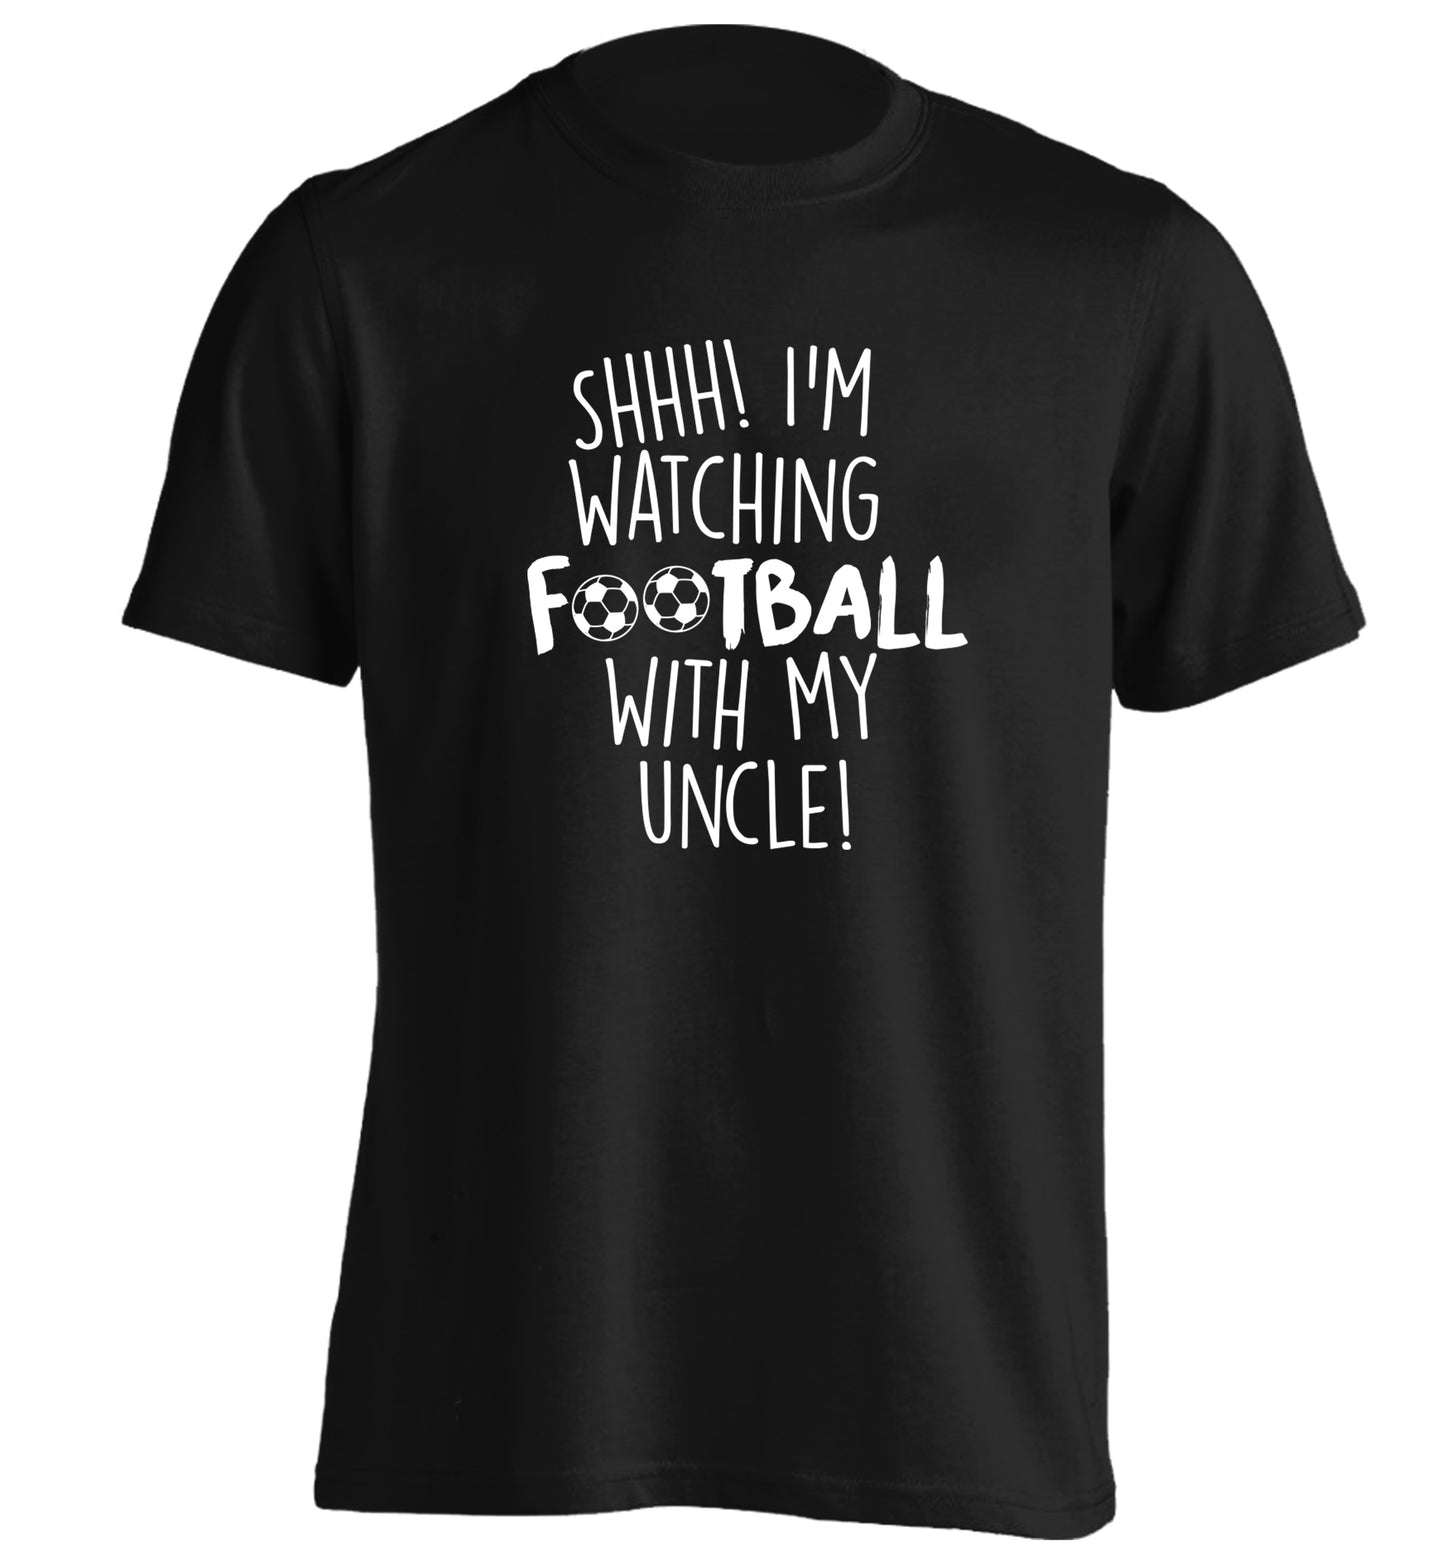 Shhh I'm watching football with my uncle adults unisexblack Tshirt 2XL